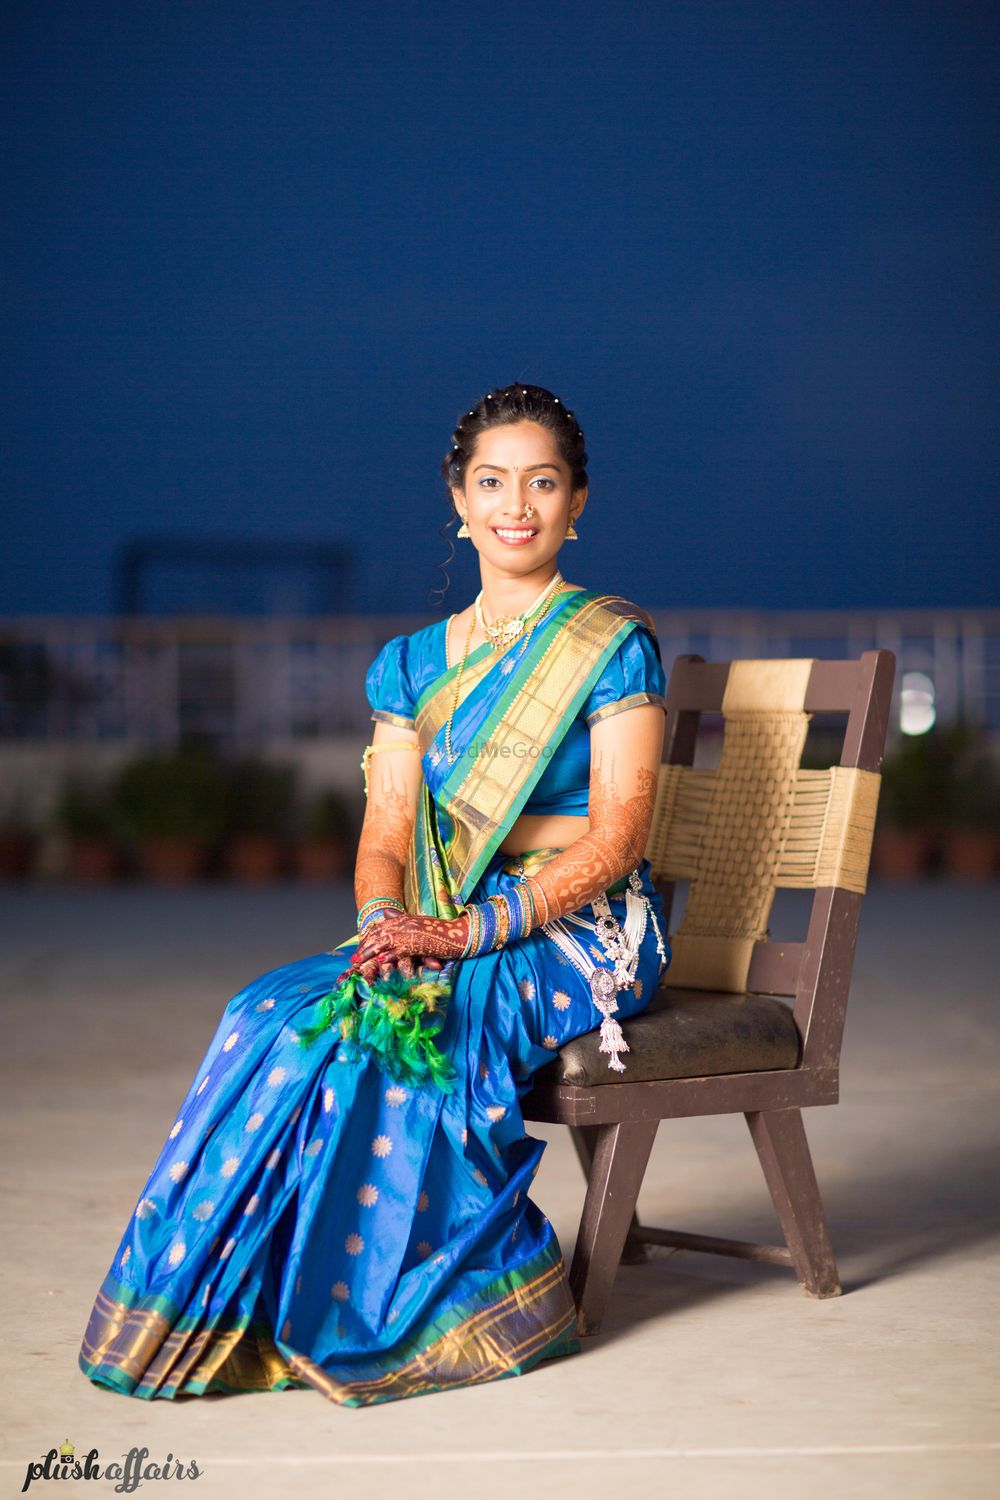 Photo of Bride in a Light Blue and Gold Kanjeevaram Saree